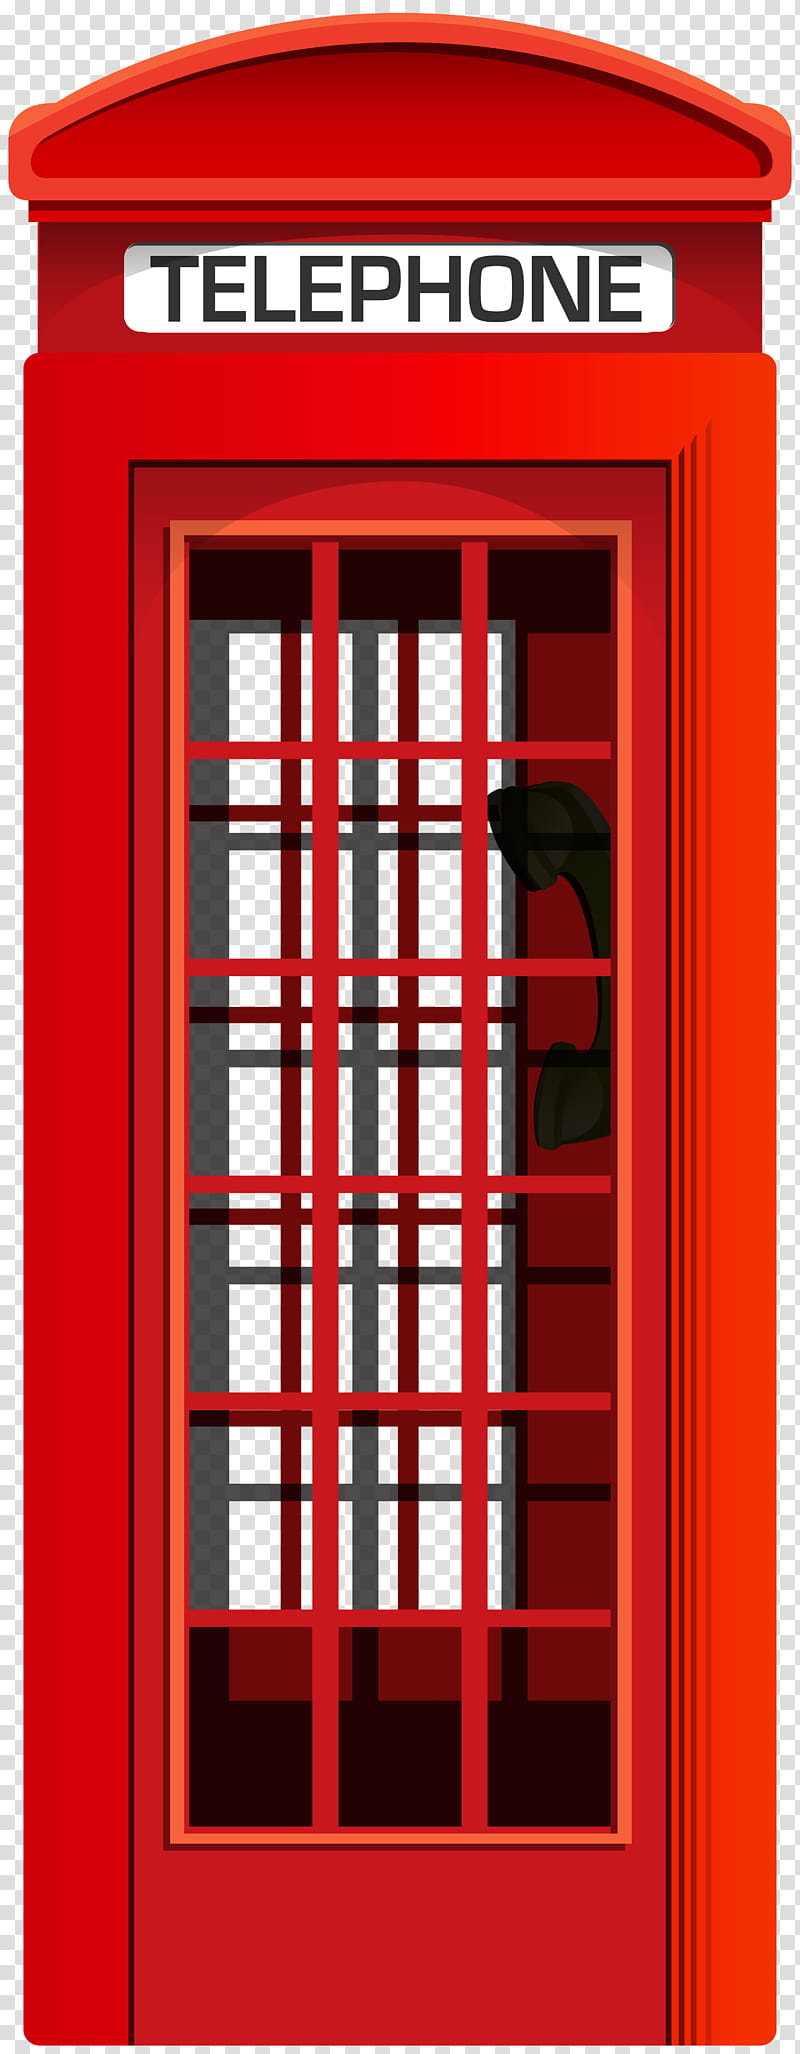 Text Box, Telephone Booth, Payphone, Mobile Phones, Telephony, Red Telephone Box, Web Design, Text Messaging transparent background PNG clipart